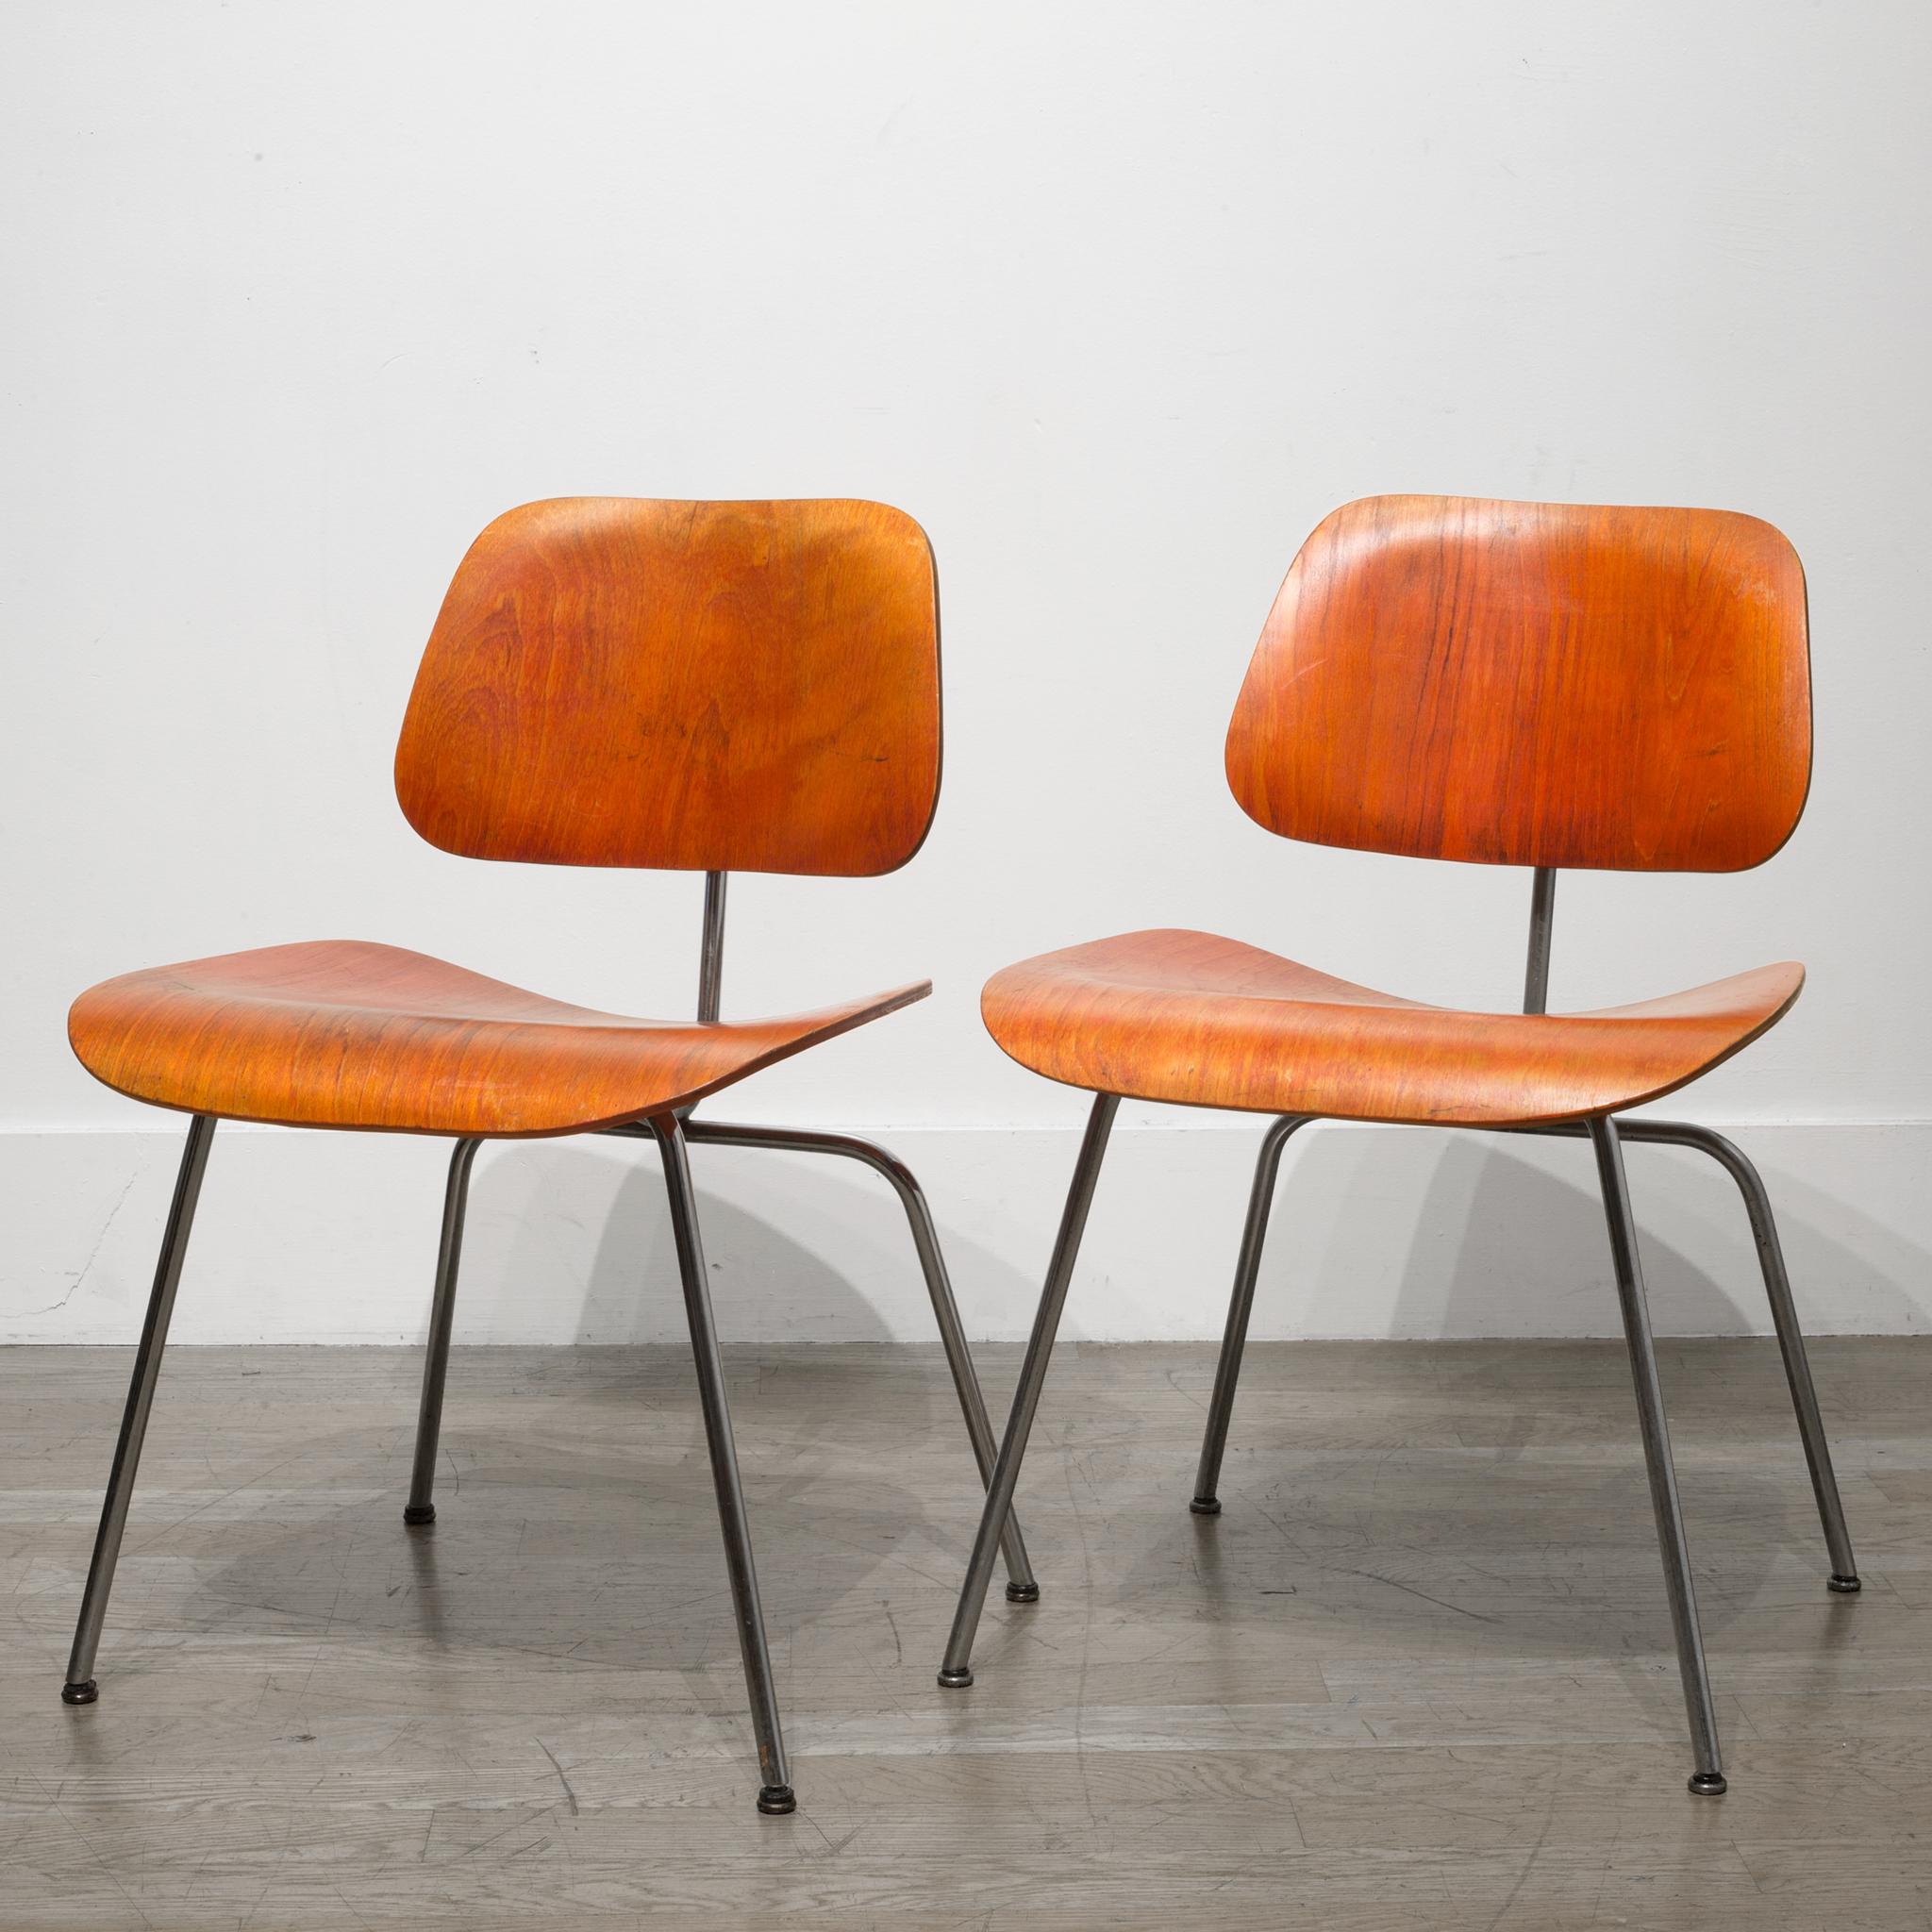 About

This is a rare set of red aniline early Herman Miller DCM by Evans which later became Eames, with walnut veneer seat and back with metal legs. All chairs have the original sliders. These chairs are fabricated from molded plywood seats and